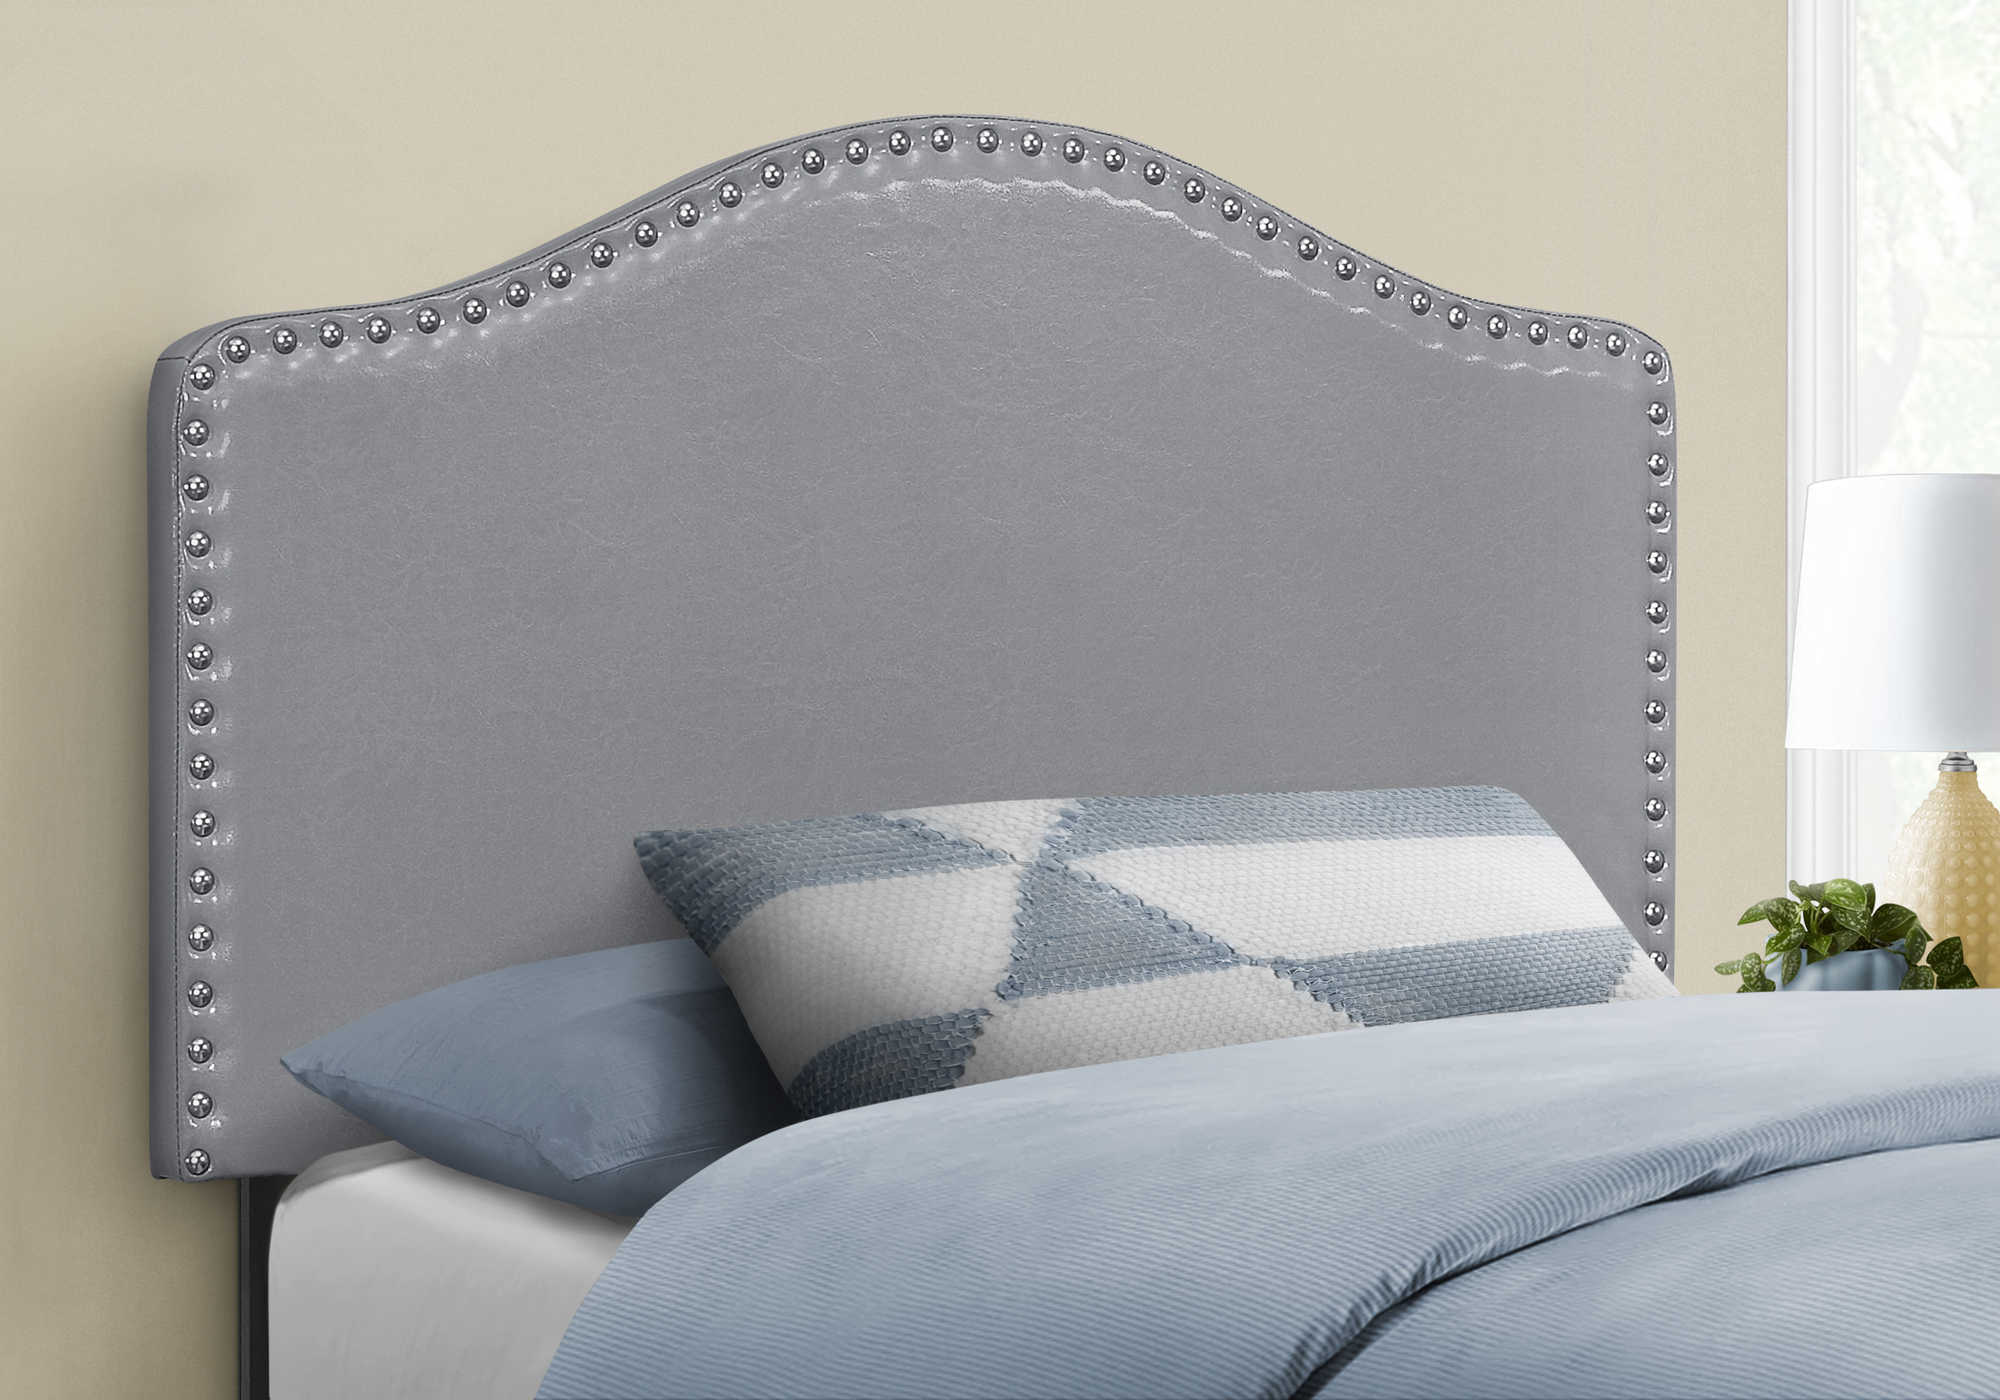 BED - TWIN SIZE / GREY LEATHER-LOOK HEADBOARD ONLY